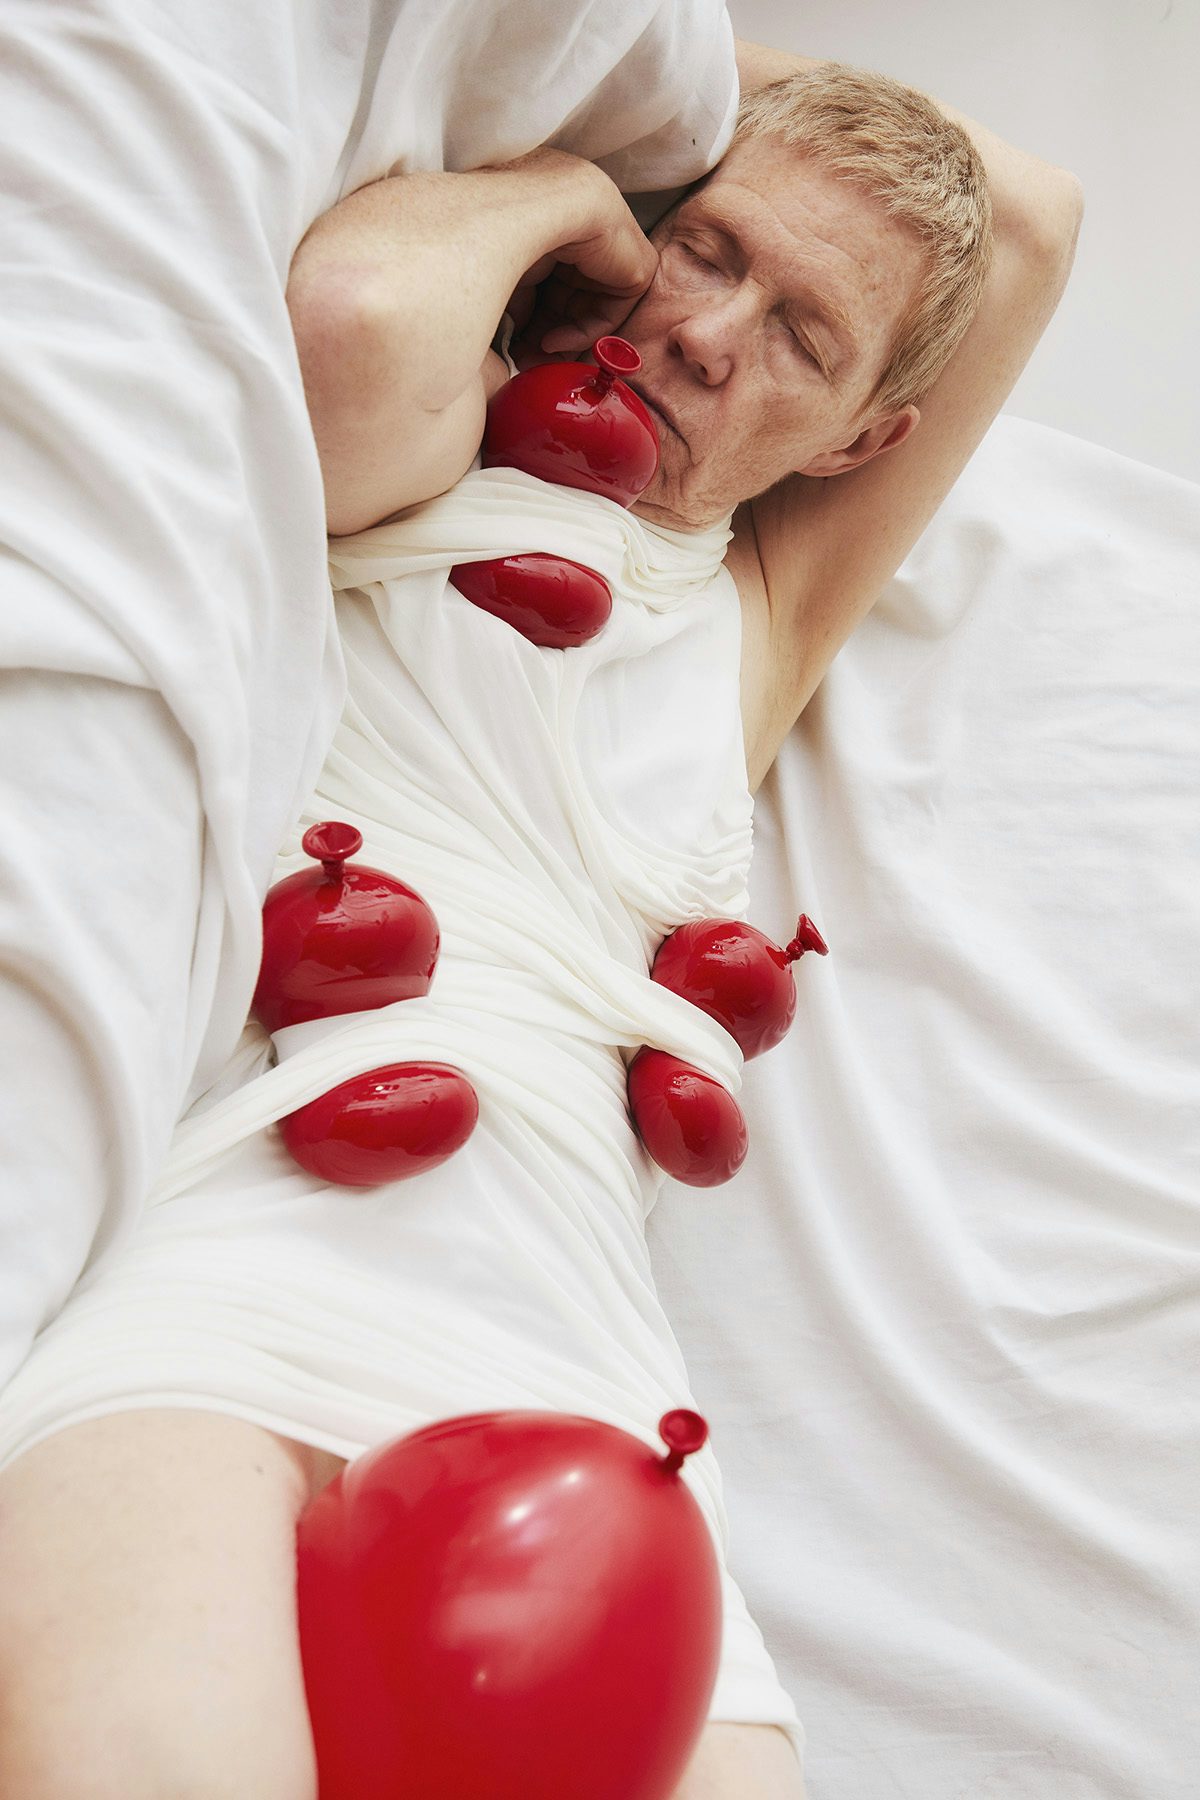 Image by Charlie Engman for SZ Magazin of his mother lying down. She wears a white dress with other red balloons strapped to her